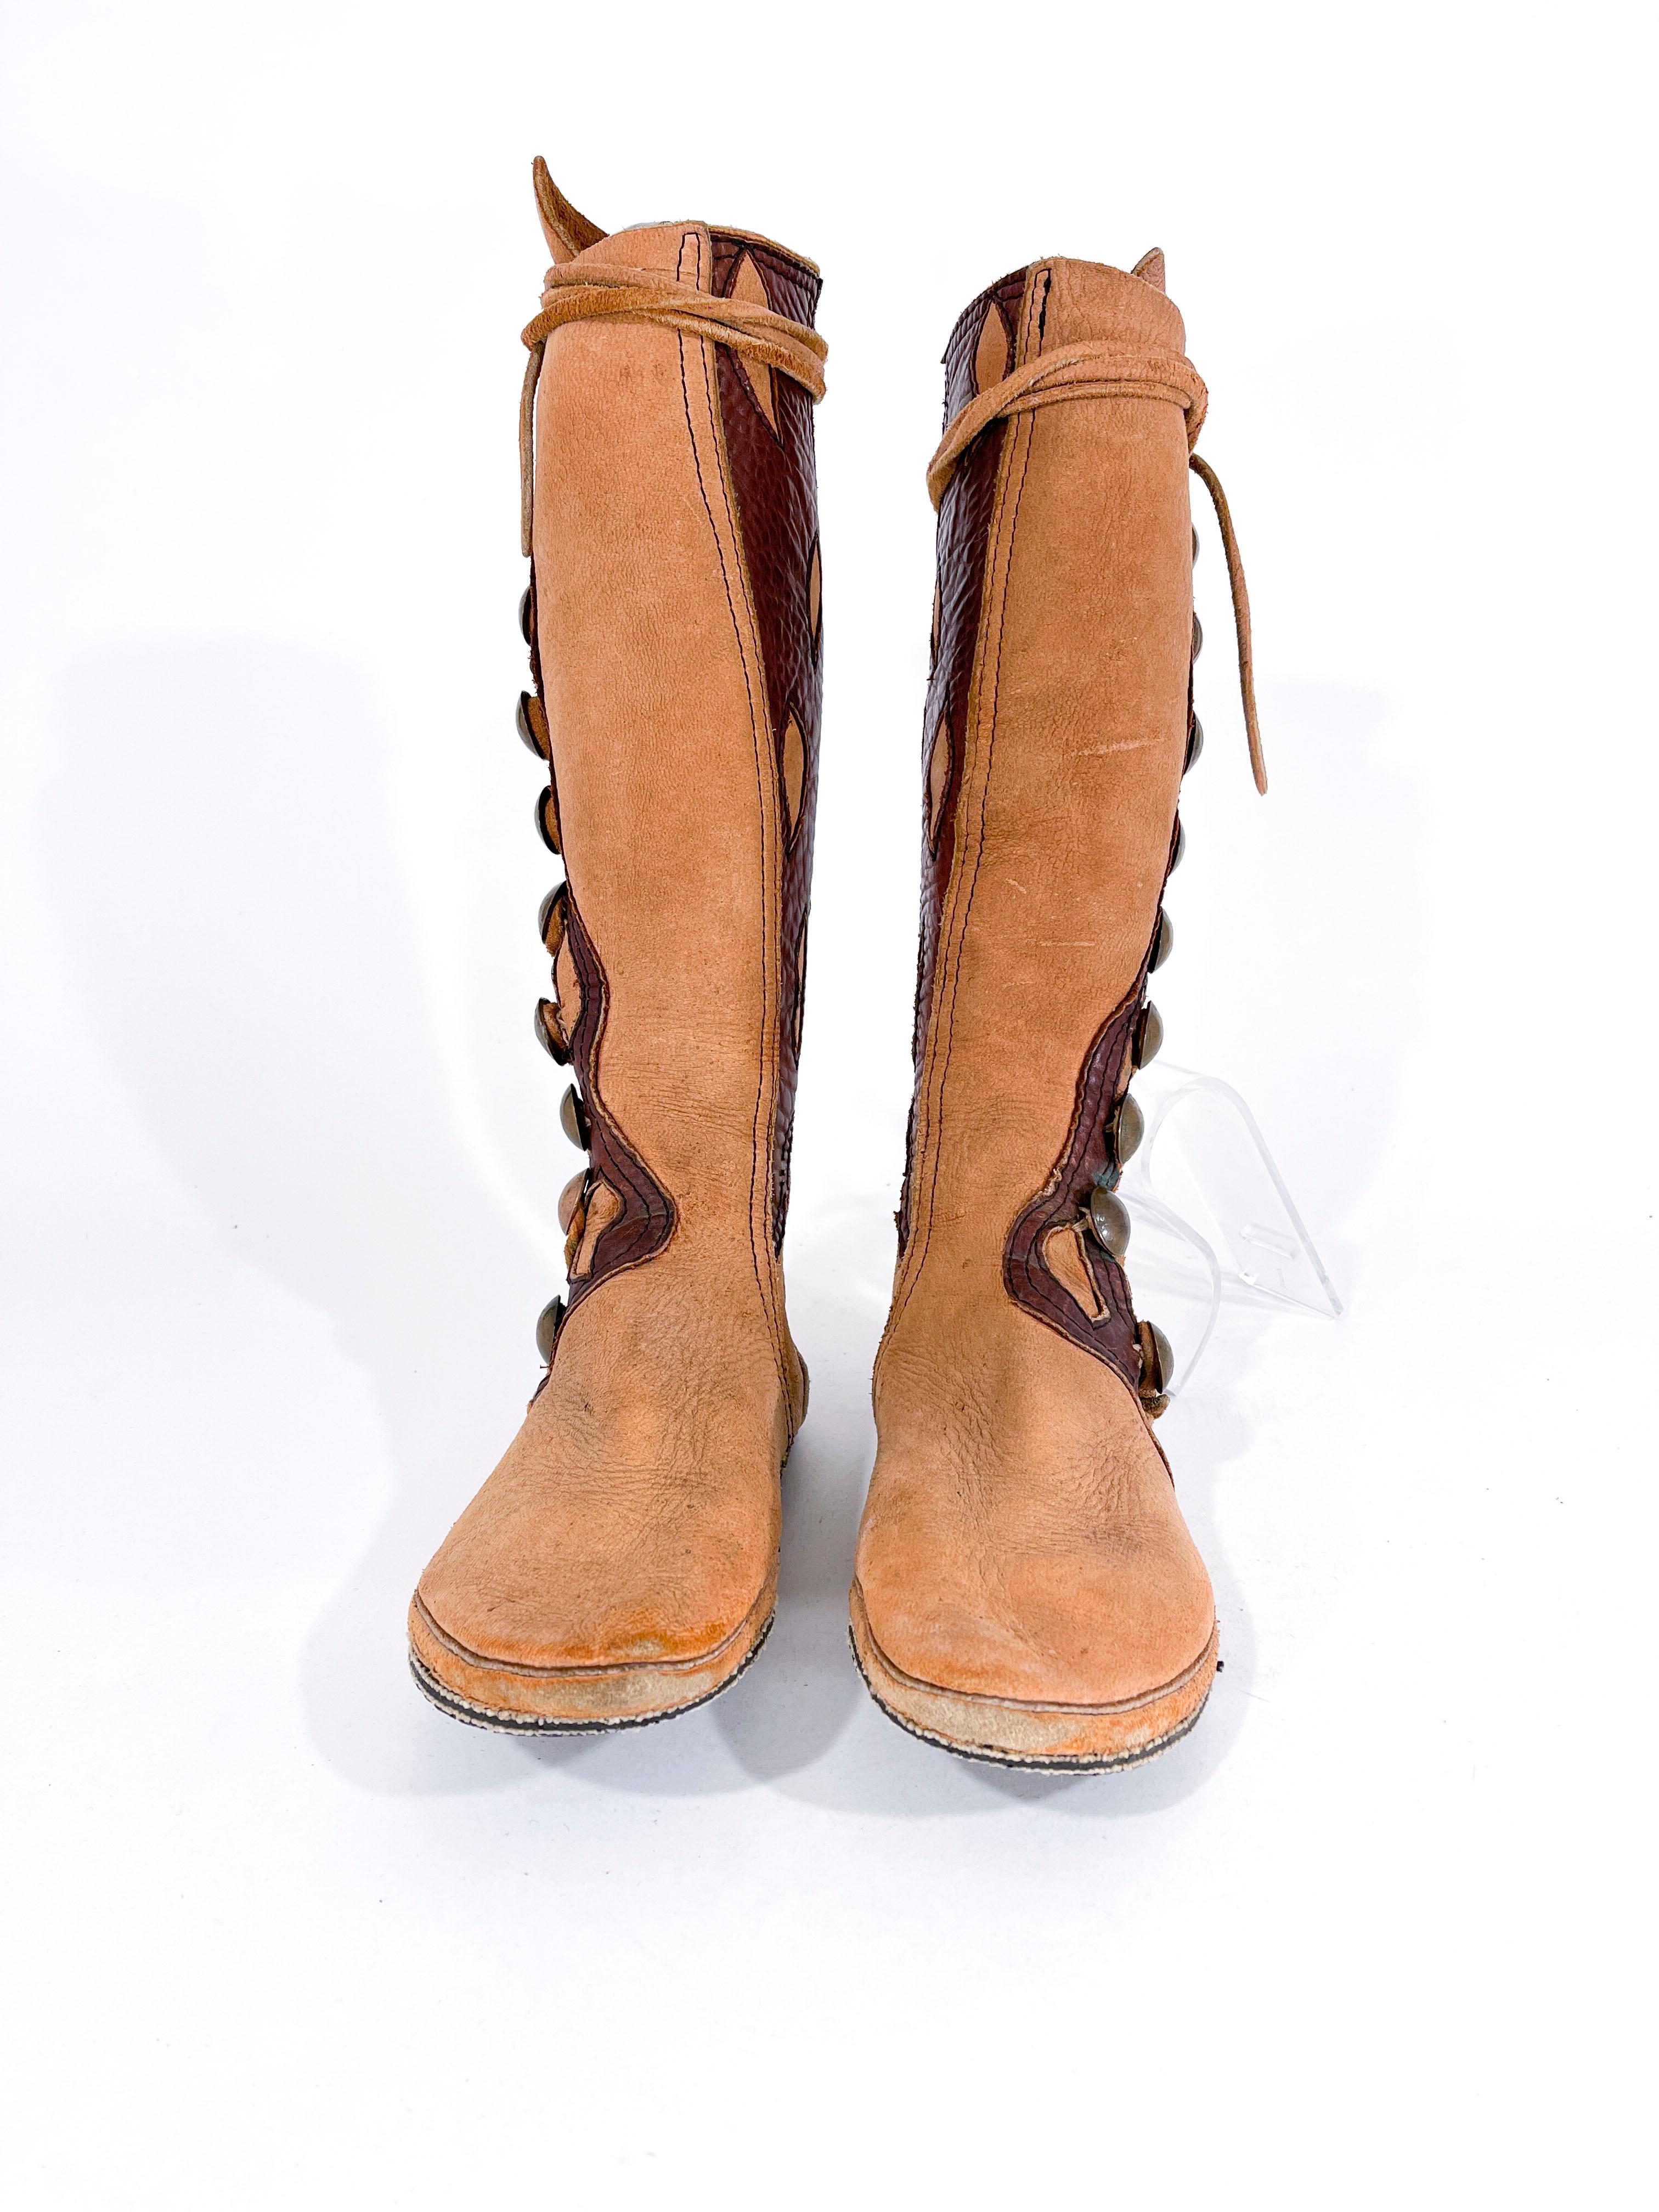 1970s custom-made elk hide bohemian gladiator style boots featuring contrasting leather inserted detailing and copper coin decorative buttons. The boot is knee-high length. 